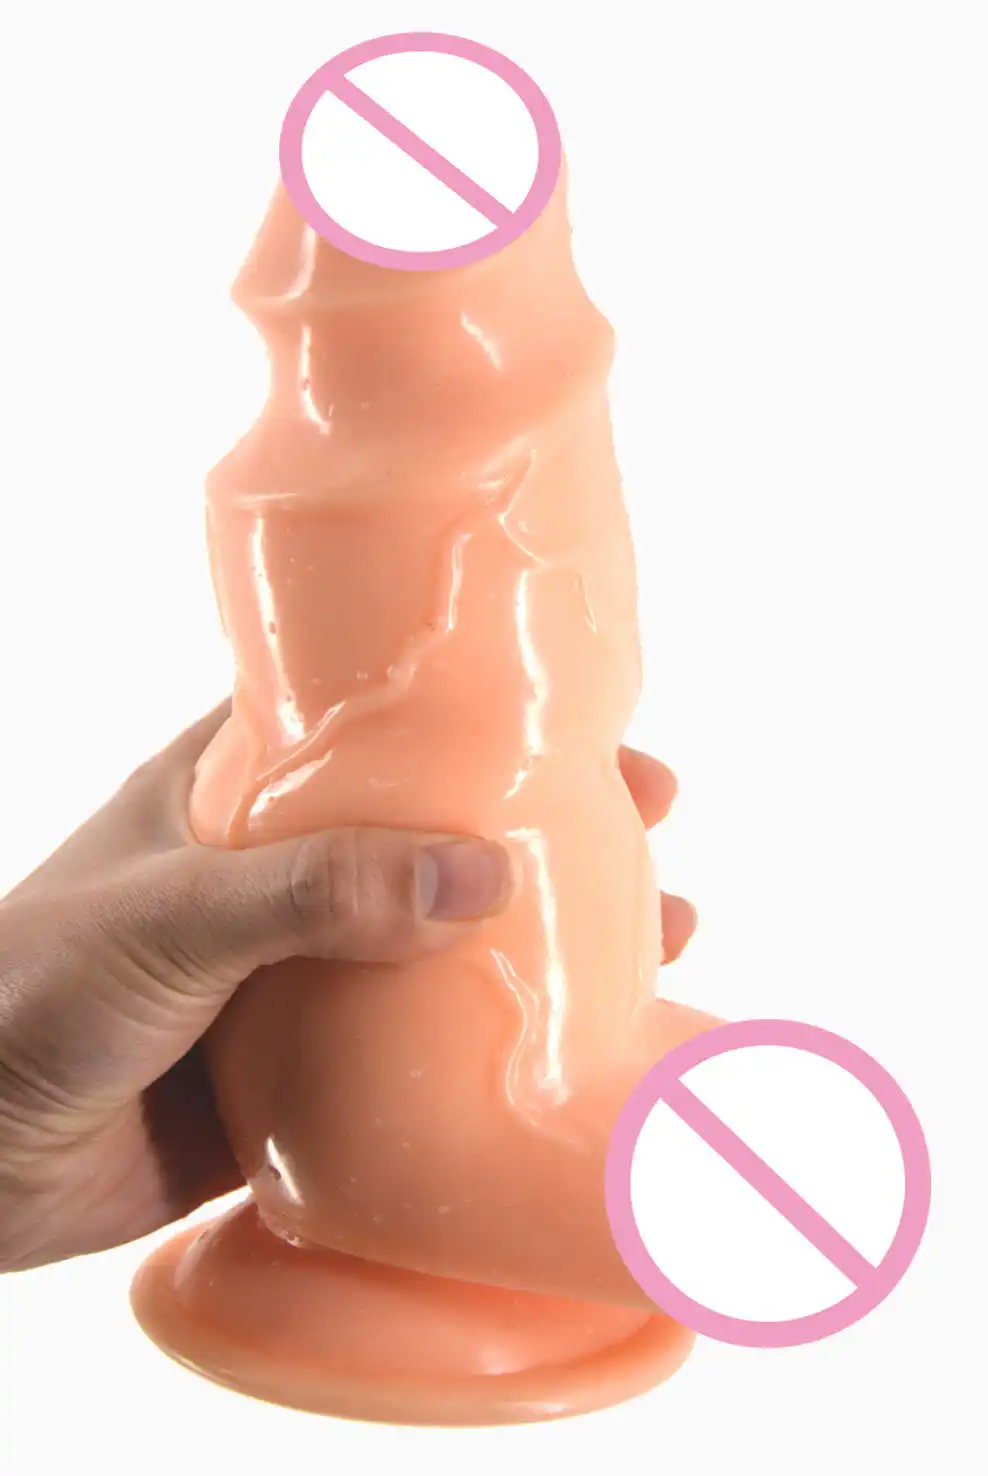 

FAAK Huge dildo suction cup Big dildo realistic penis ribbed extreme stimulate adult sex products sex toys for women anal dildo